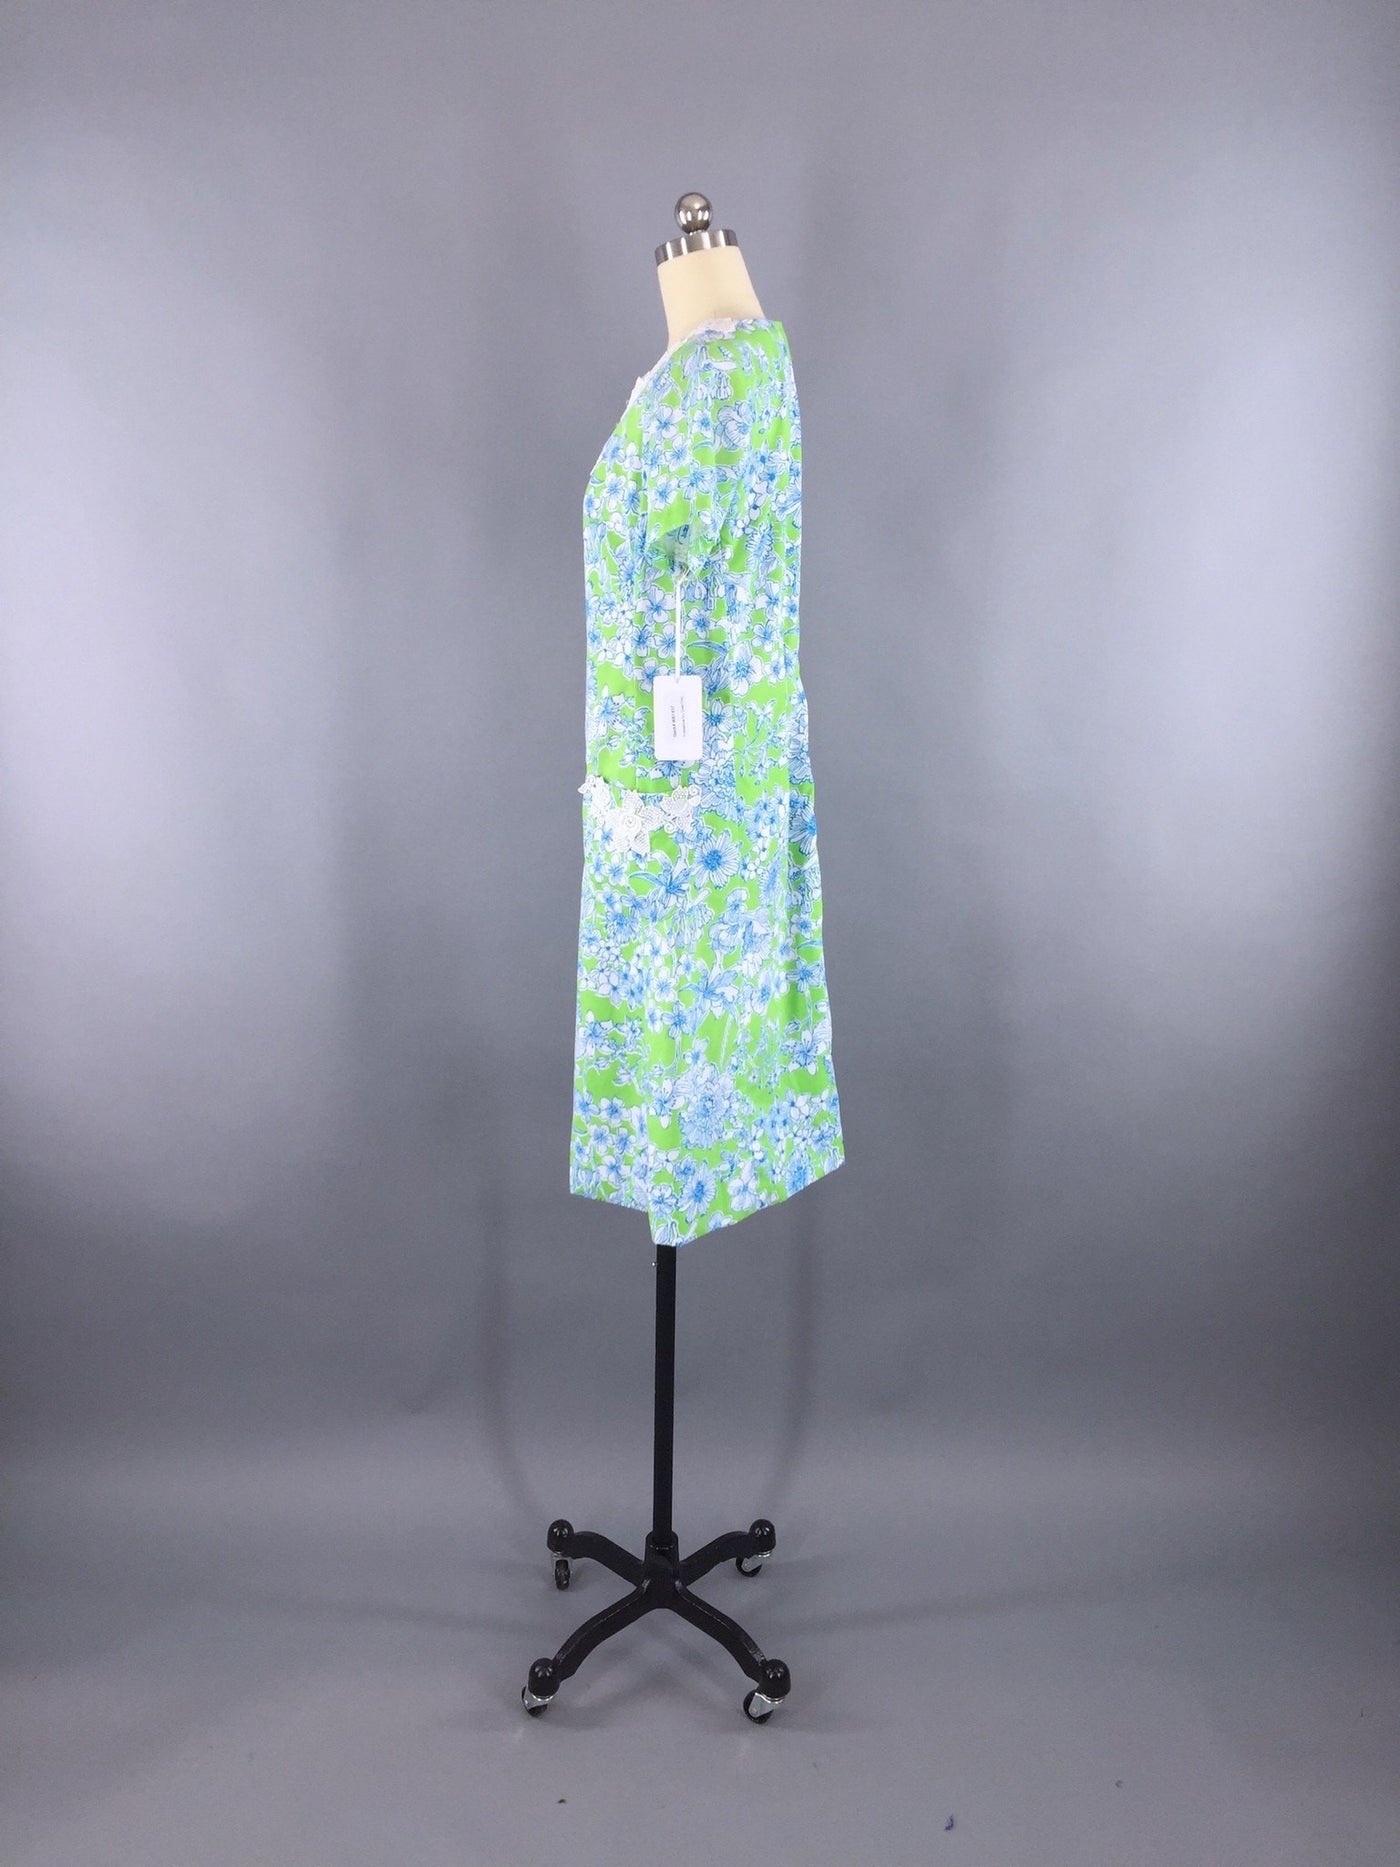 Vintage 1960s Lilly Pulitzer Dress / Preppy Green and Blue Floral Prin ...